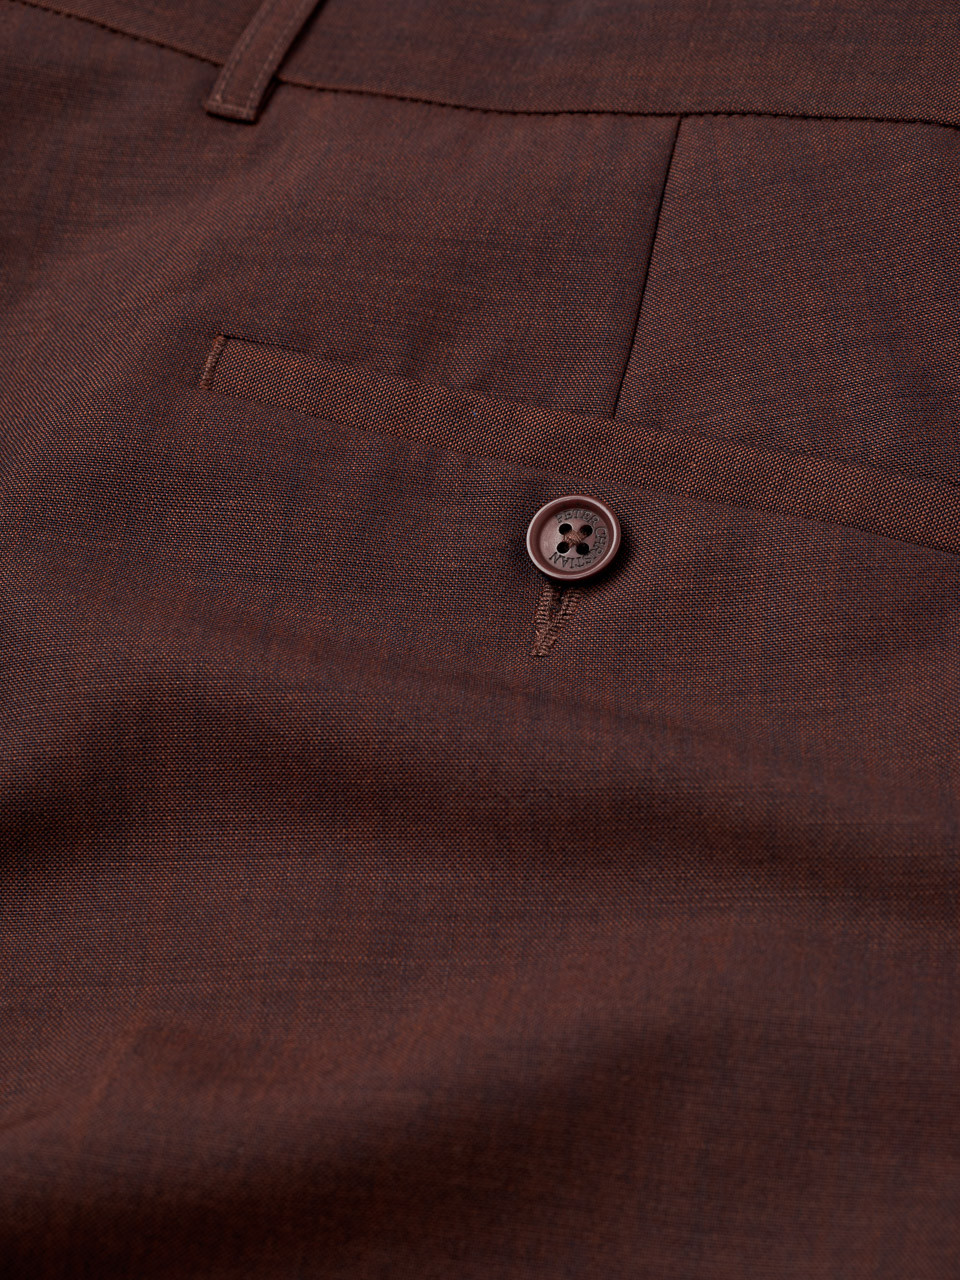 Chestnut Luxury Wool & Mohair Two Tone Pants